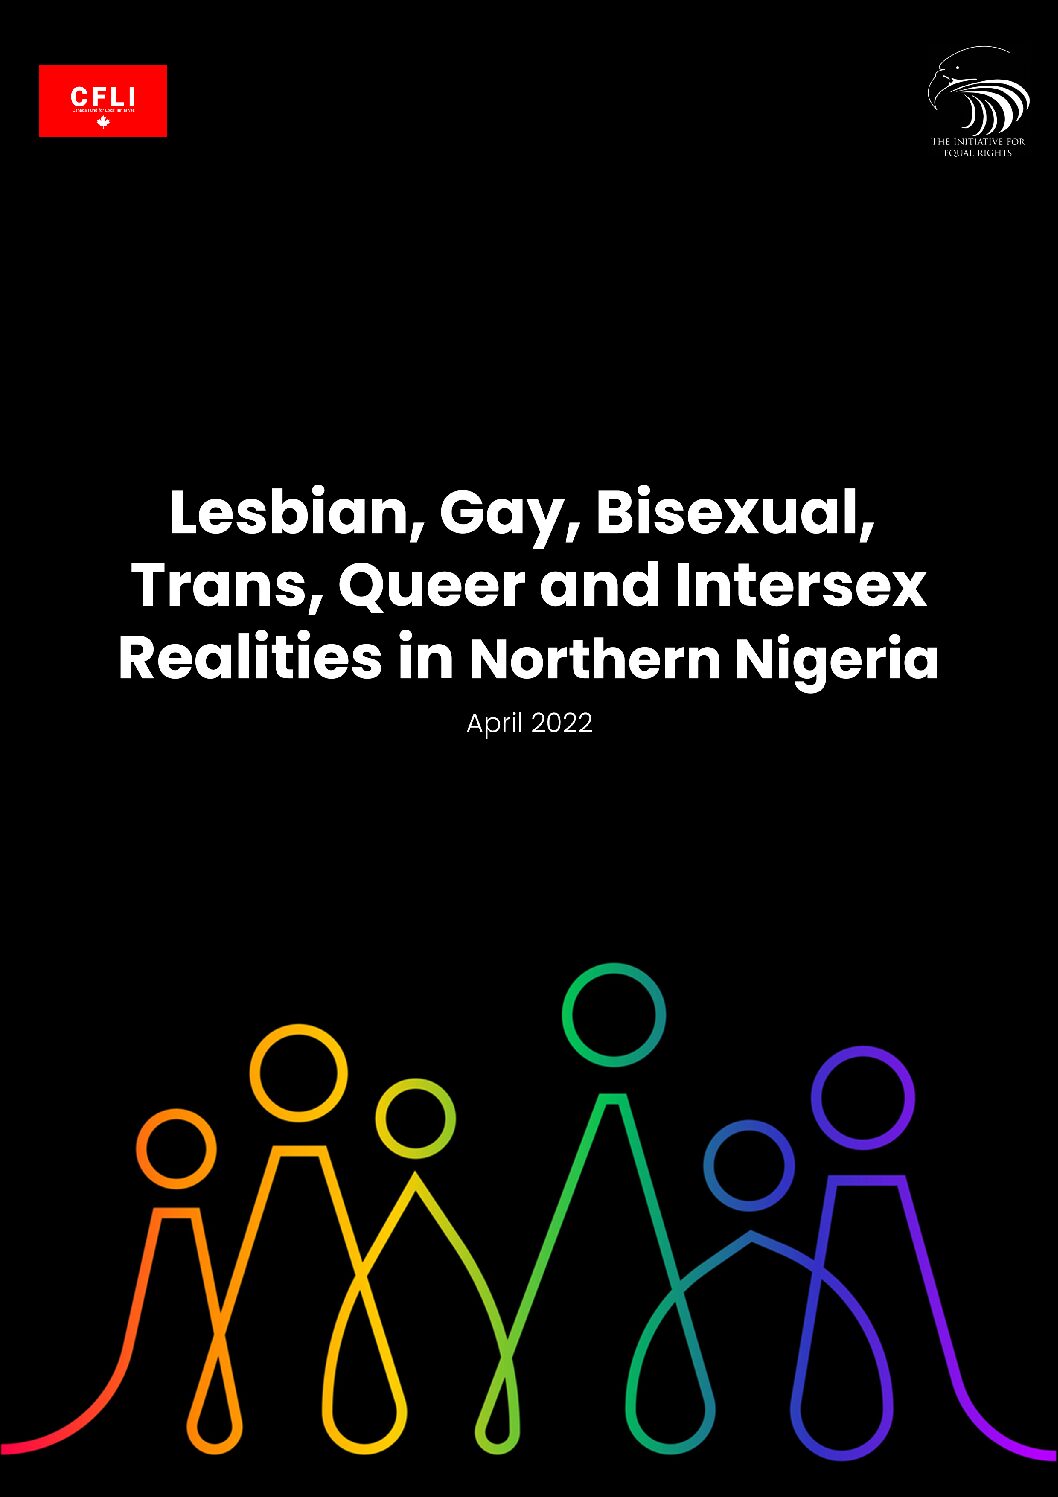 Lesbian, Gay, Bisexual, Trans, Queer And Intersex Realities In Northeast Nigeria